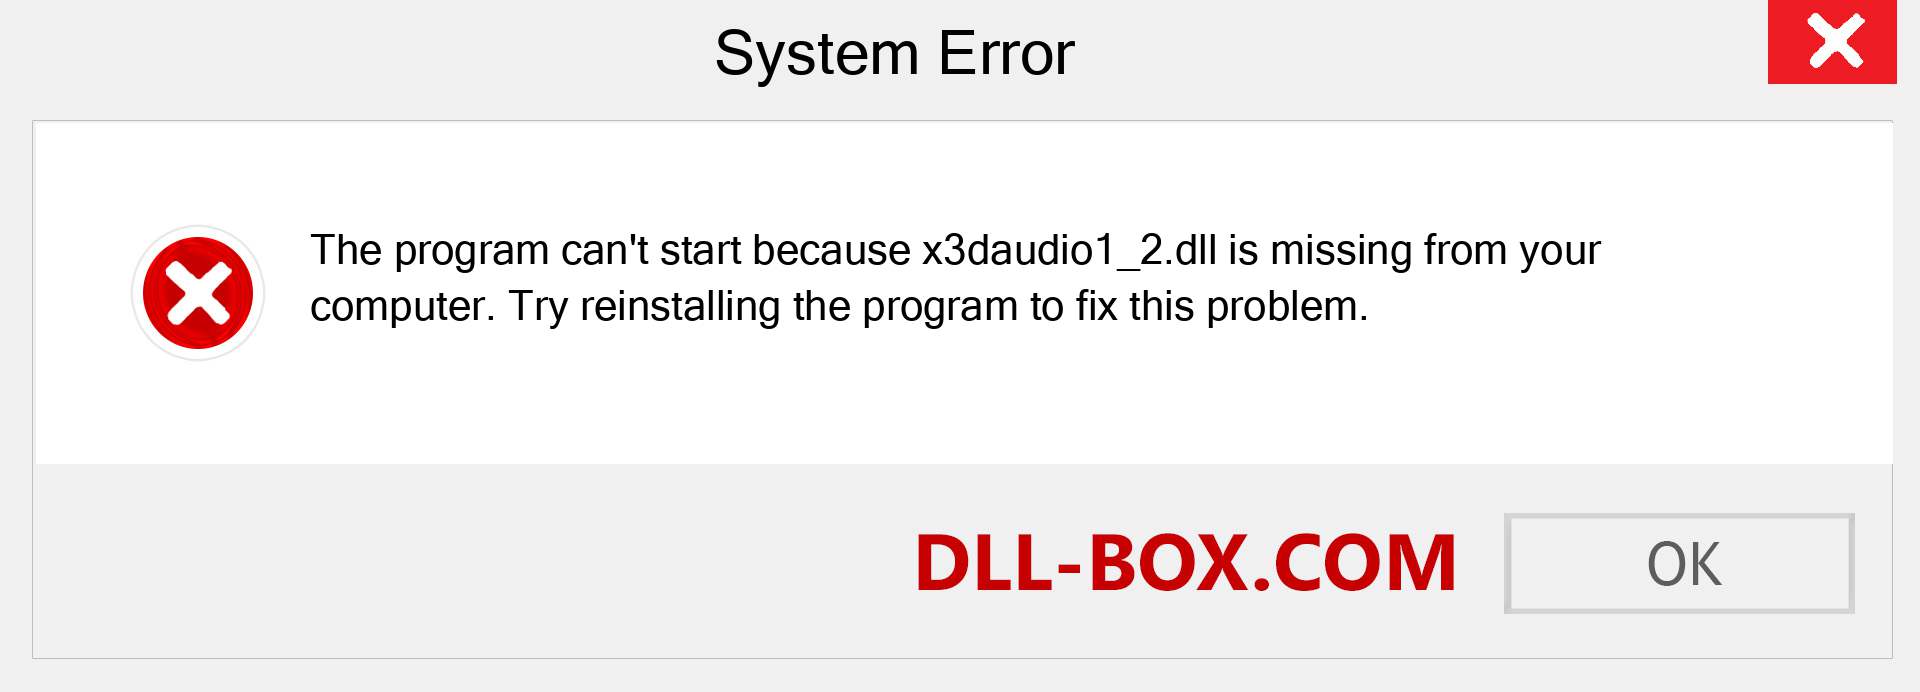  x3daudio1_2.dll file is missing?. Download for Windows 7, 8, 10 - Fix  x3daudio1_2 dll Missing Error on Windows, photos, images